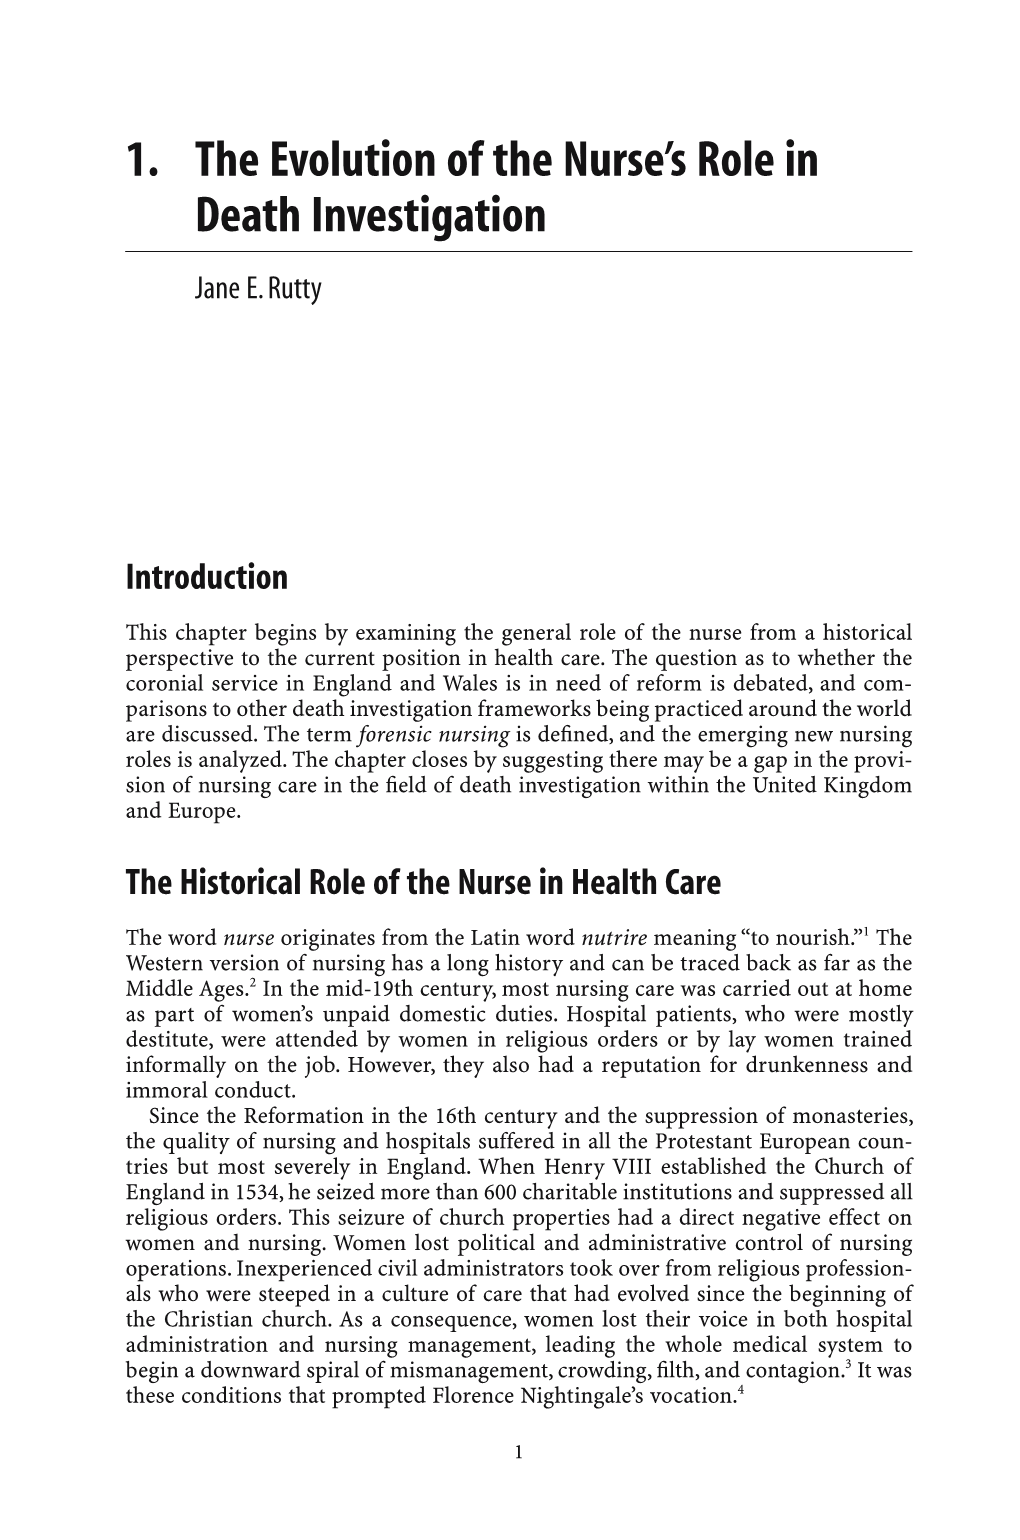 1. the Evolution of the Nurse's Role in Death Investigation